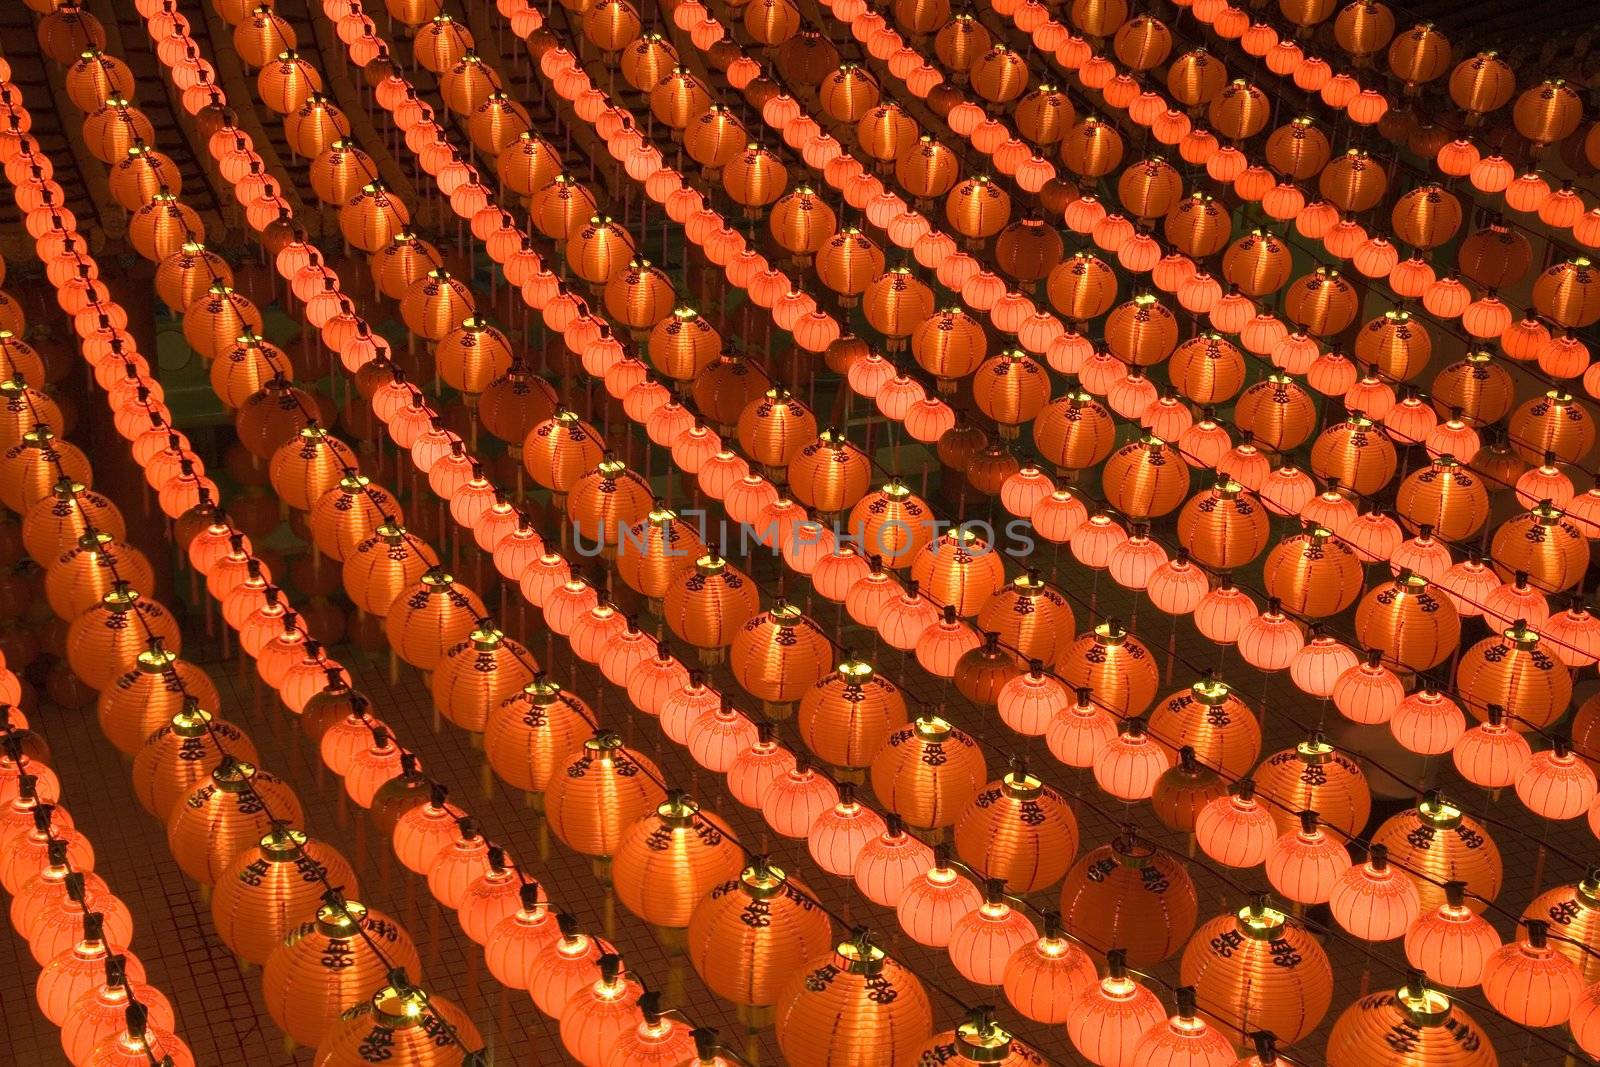 Image of red lanterns at a Chinese temple in Malaysia.